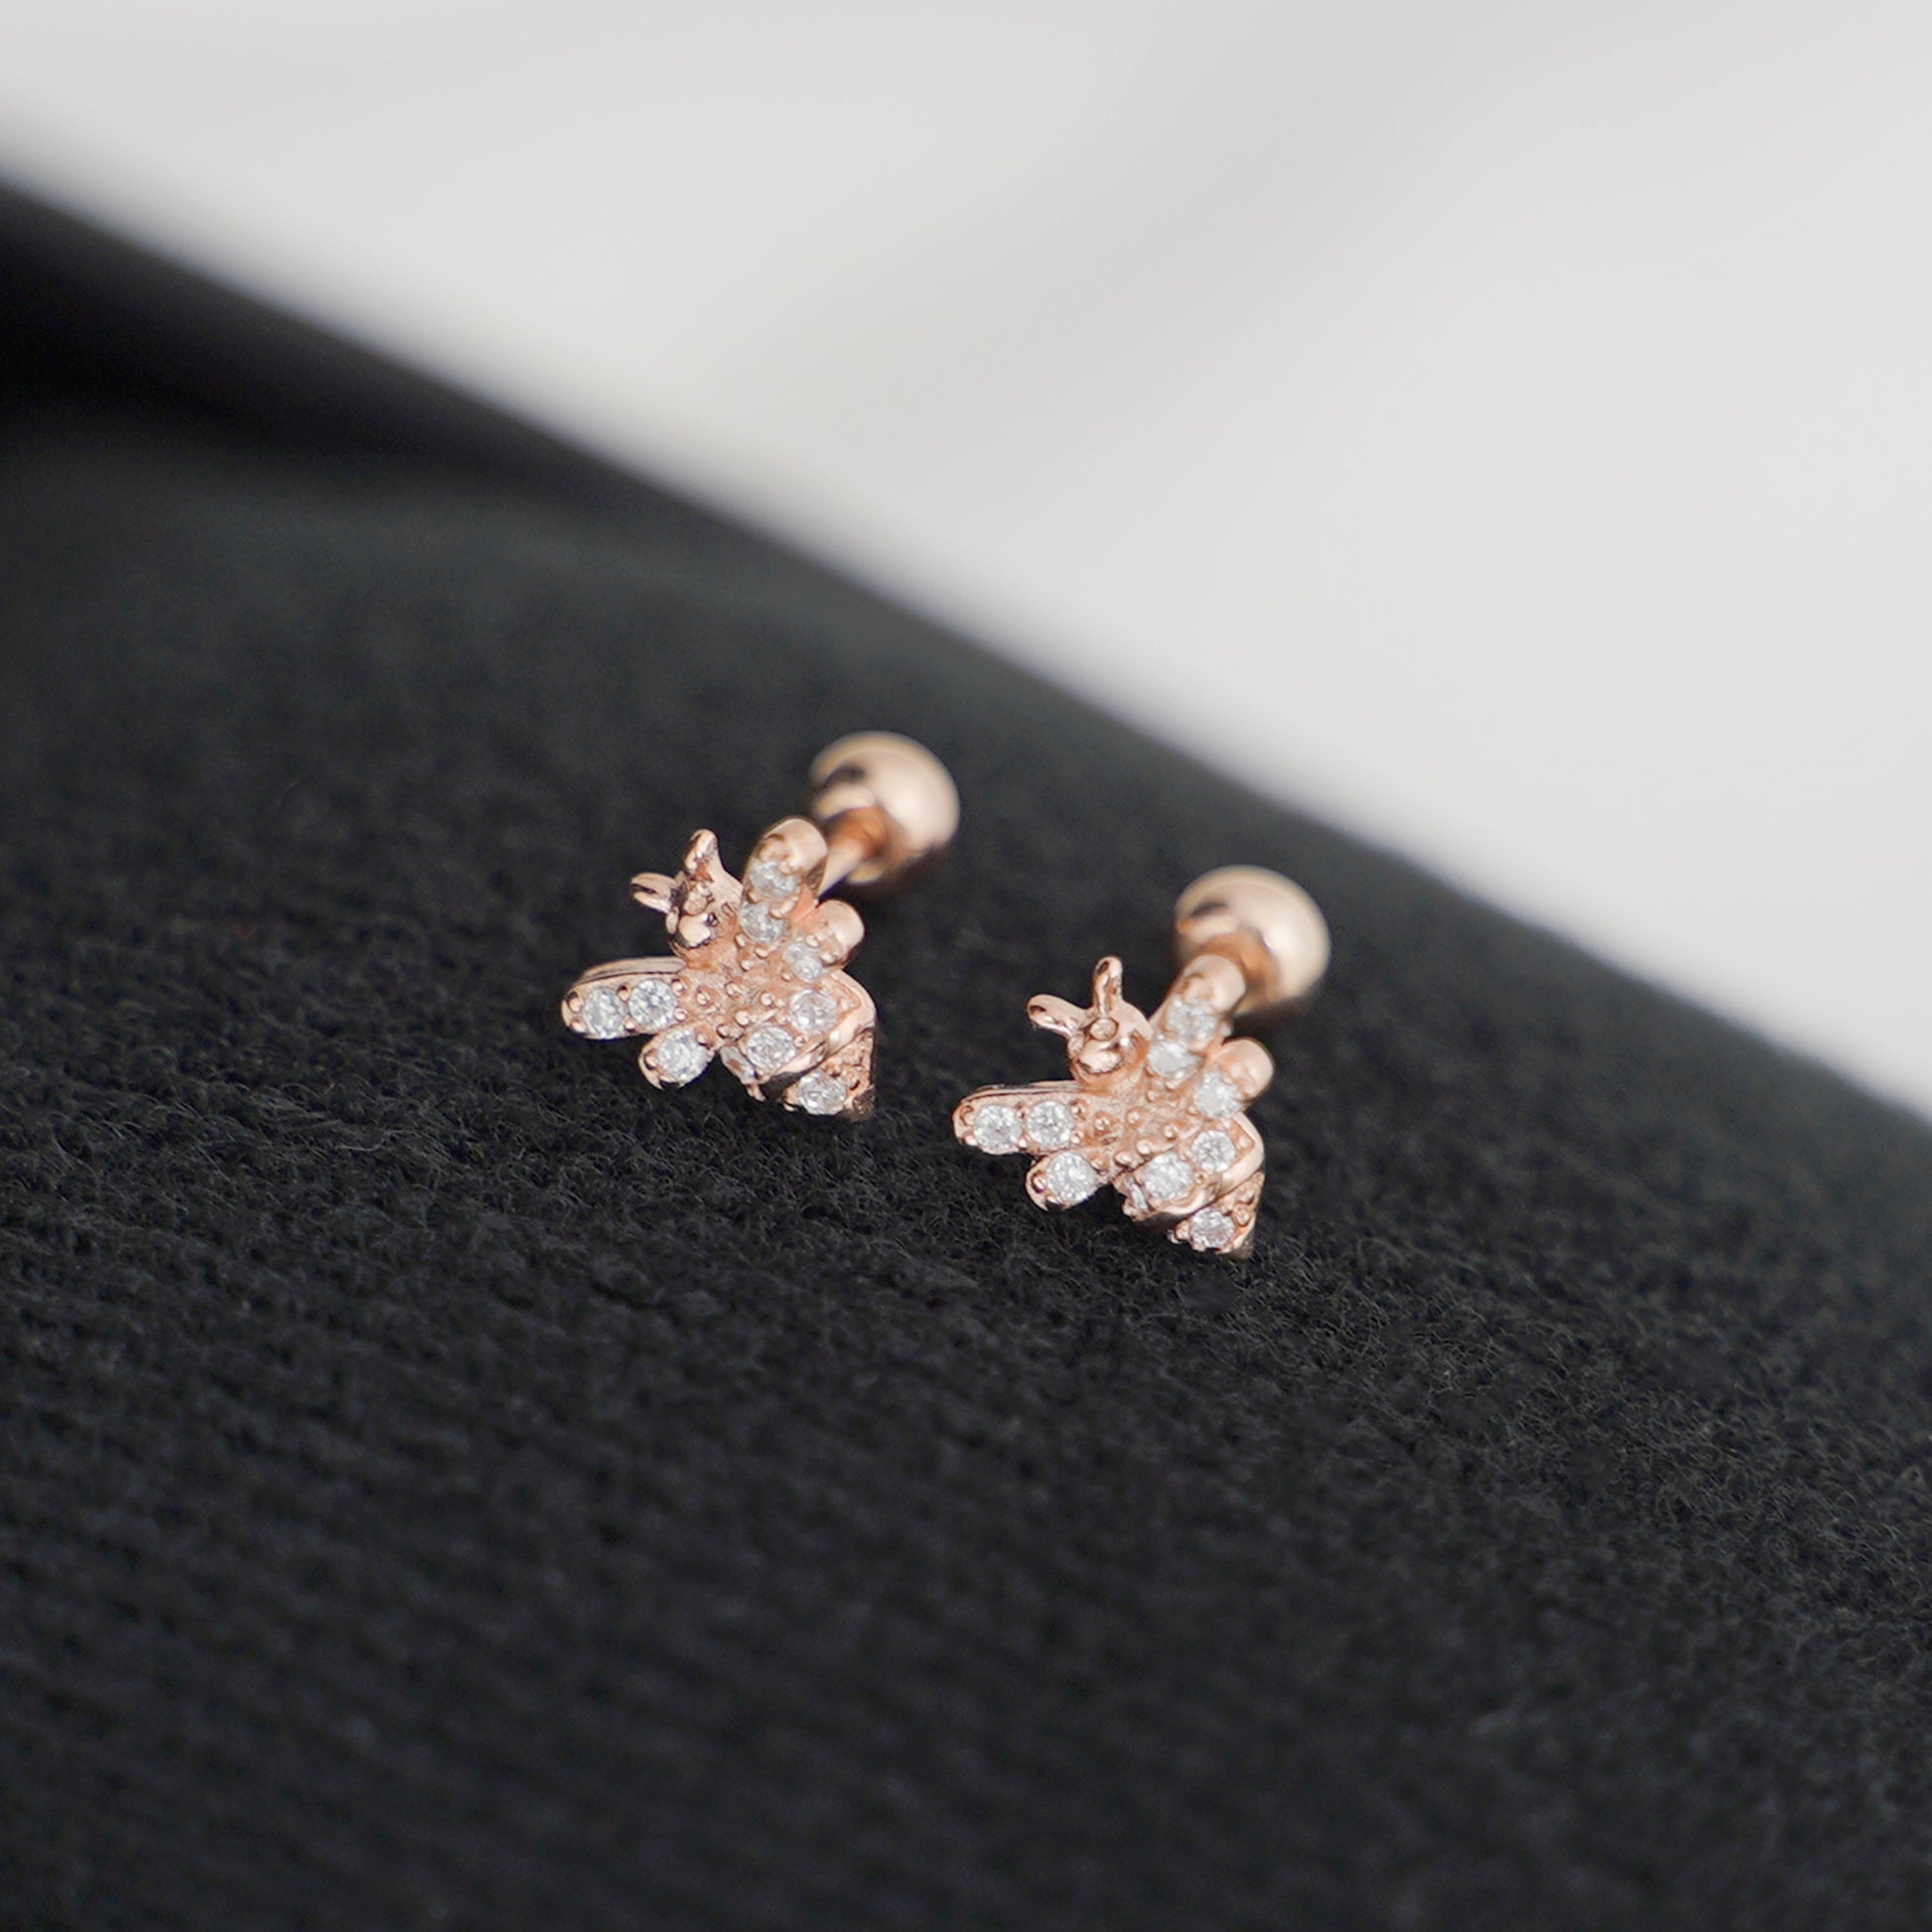 Bee Stud Earrings with CZ Beads and Screwbacks in Rose Gold, 18K Gold & Sterling silver - sugarkittenlondon